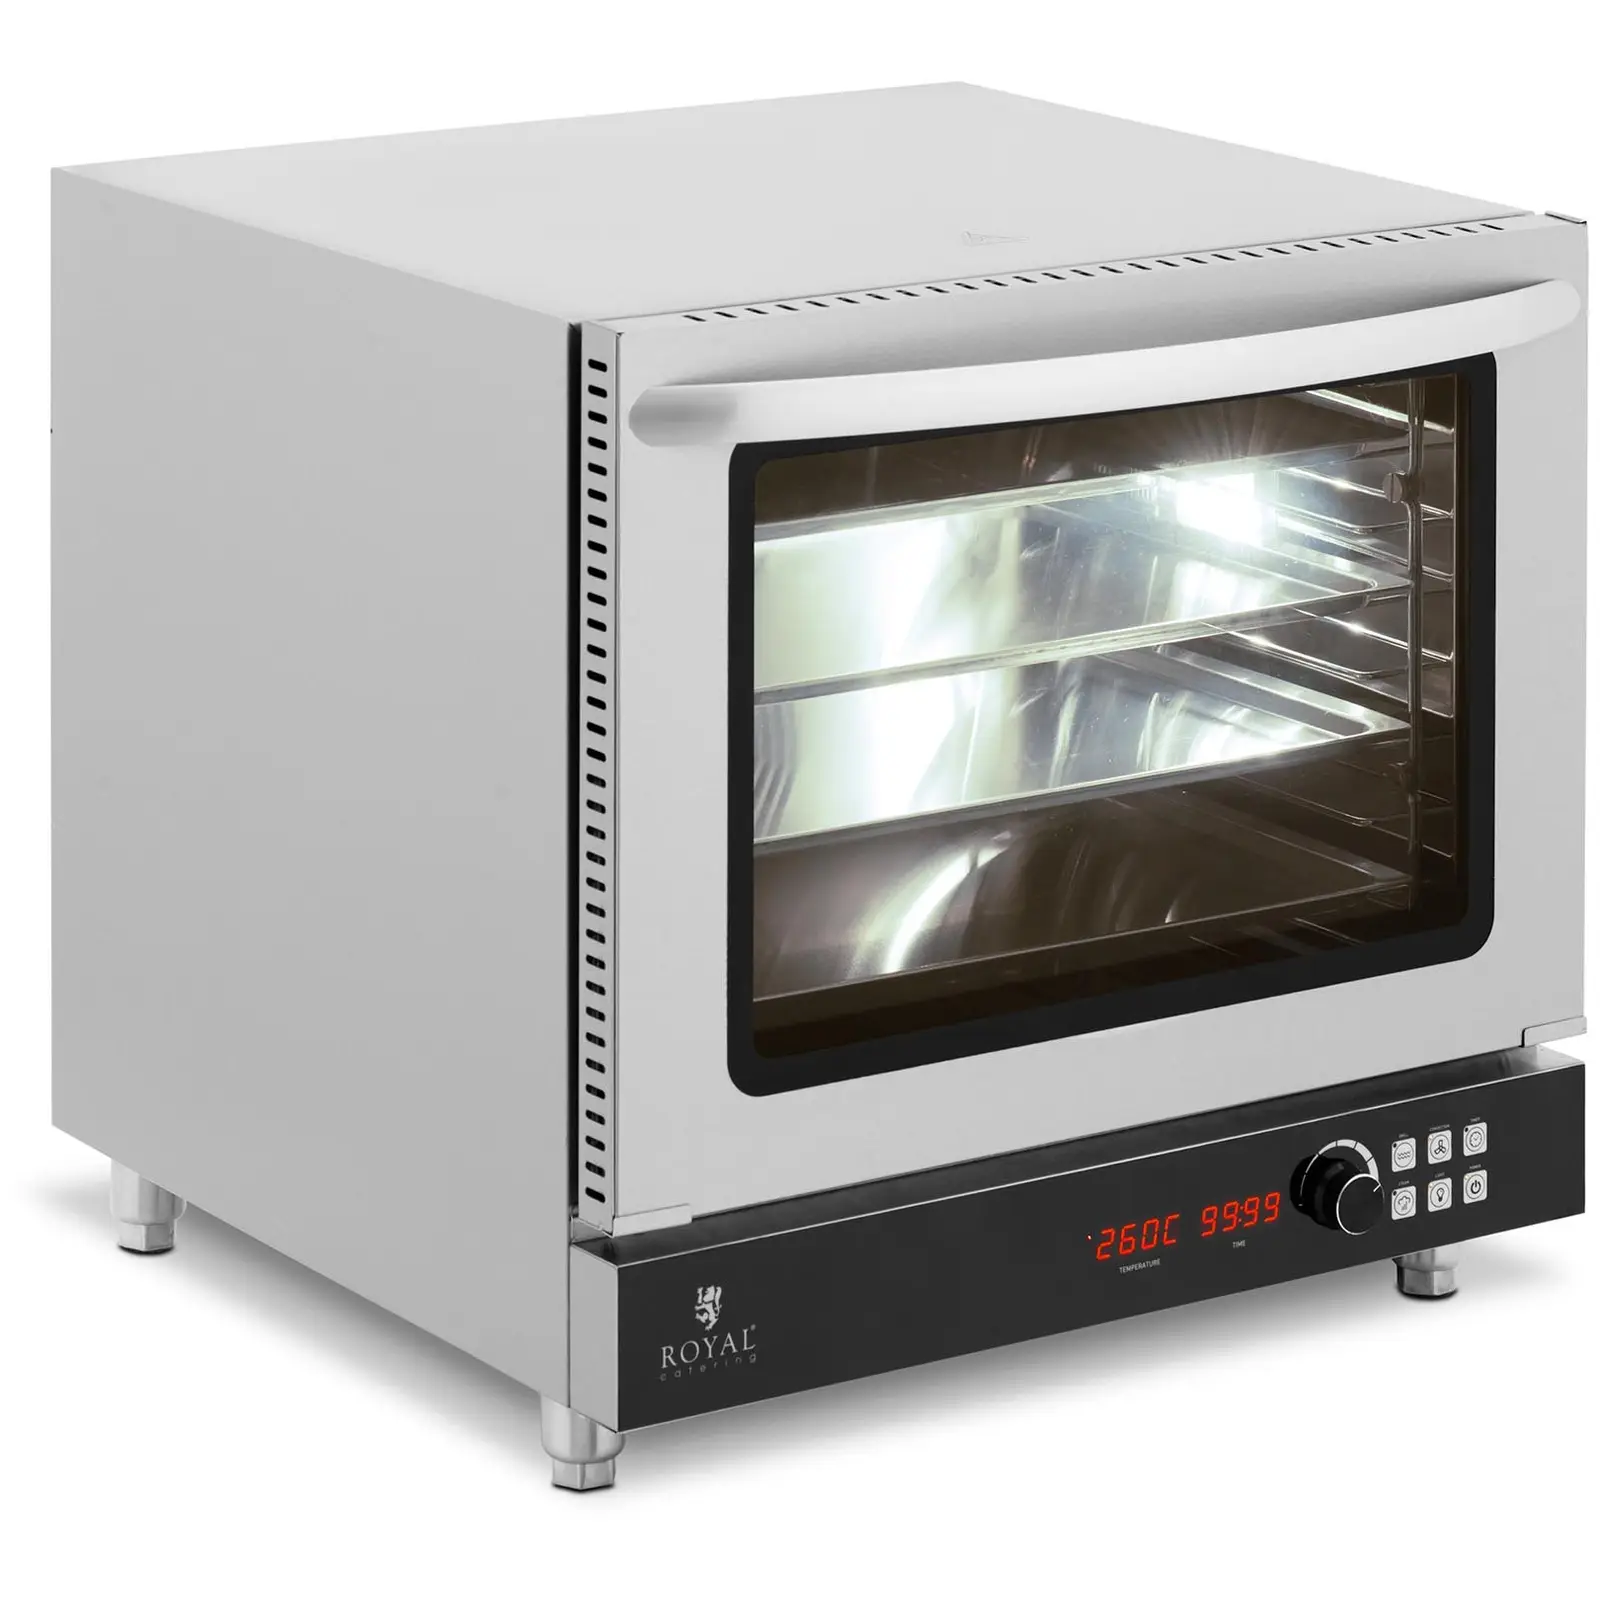 Hot air oven - 2800 W - Timer - 3 functions - 4 Trays